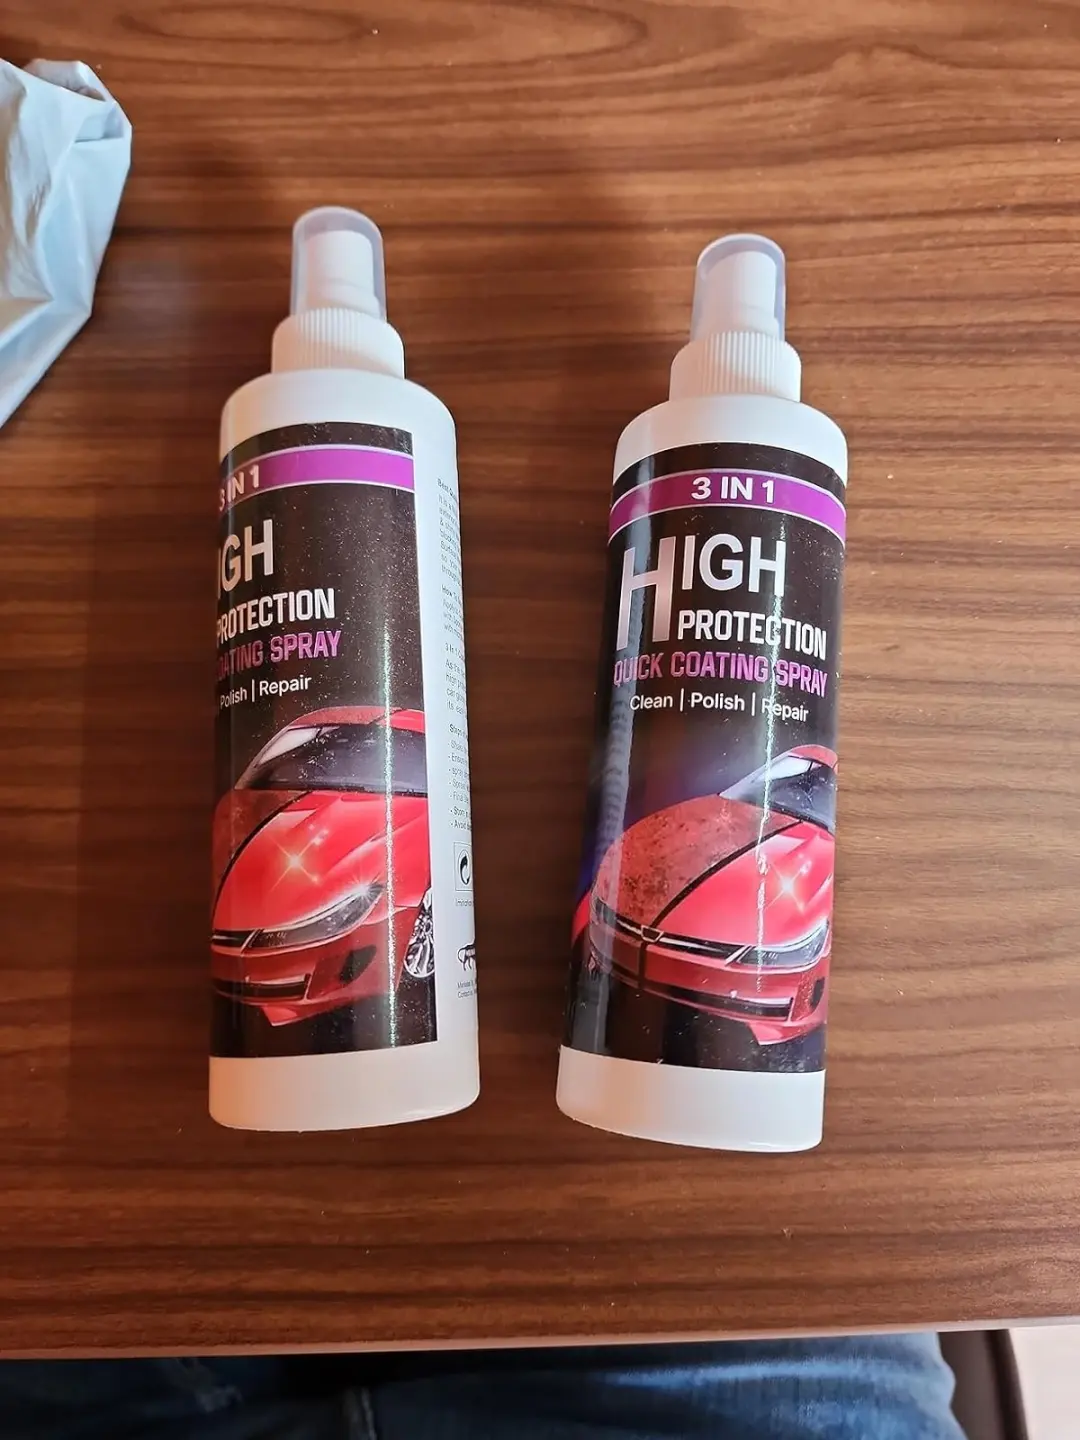 HARAY 3 in 1 High Protection Quick Car Coating Spray, Extreme